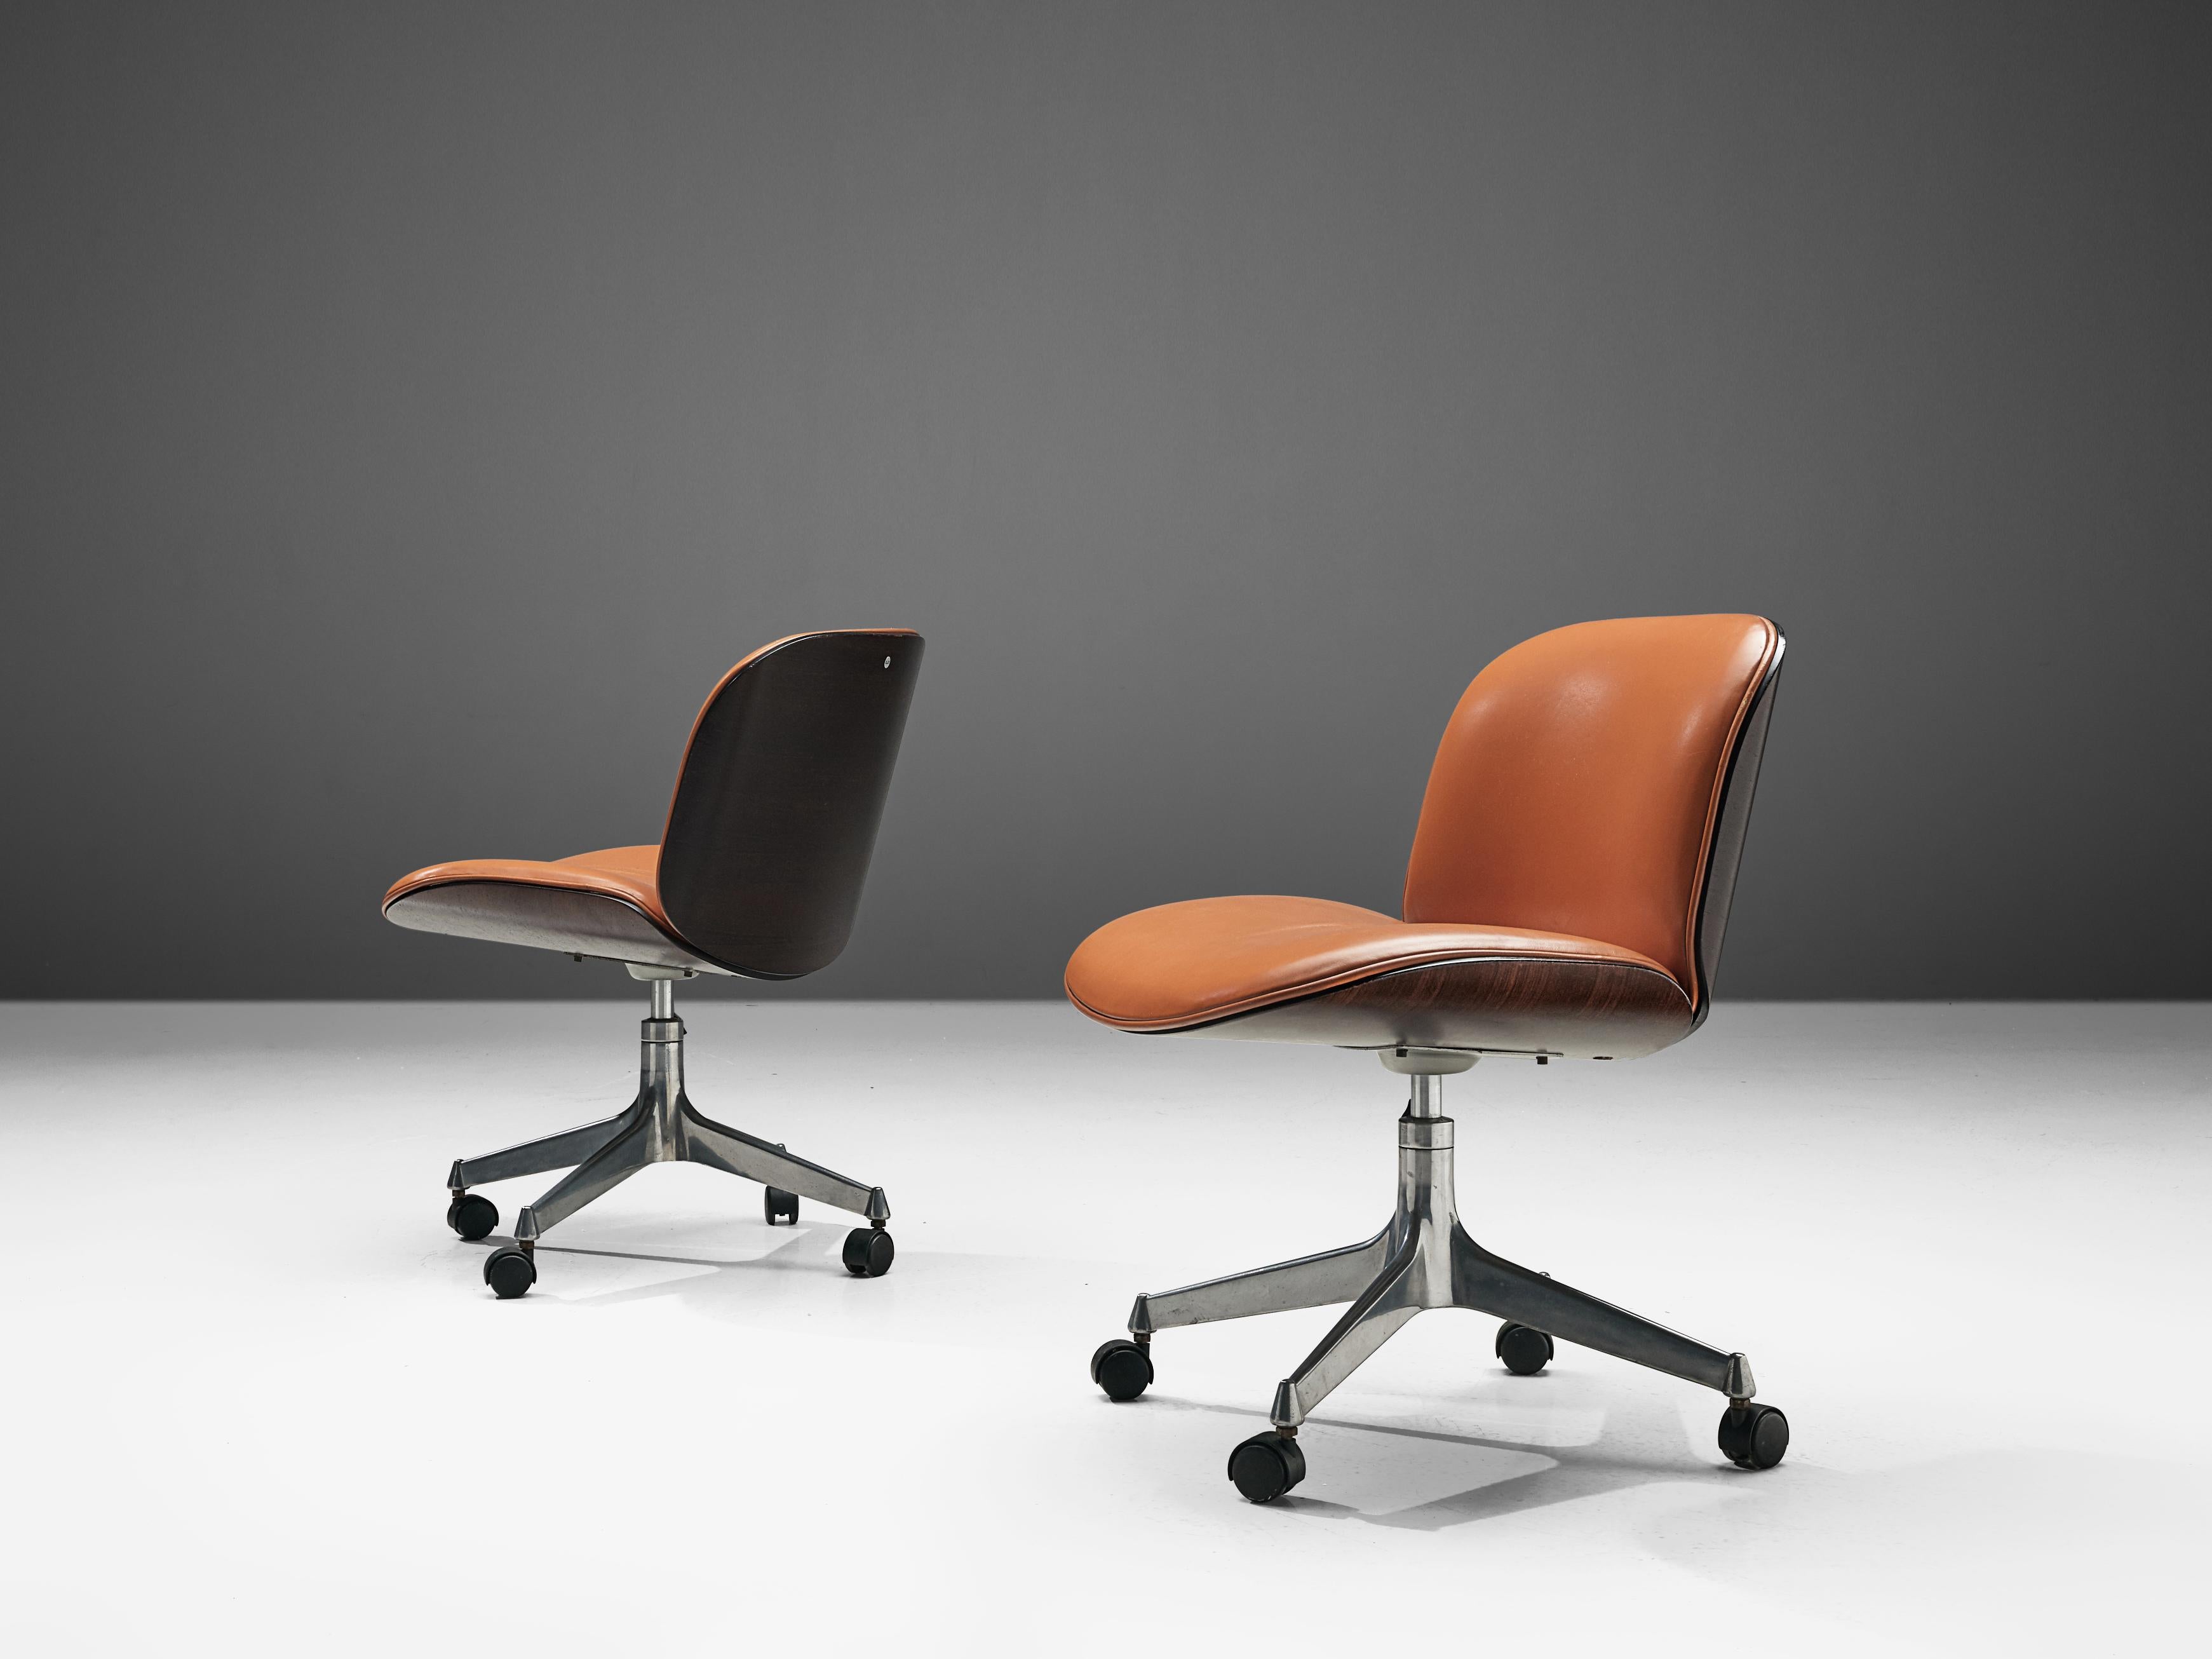 Ico Parisi for MIM Roma, office chairs, rosewood, metal and leatherette, Italy, 1960s.

Swivel chairs from the 'Terni' series by MIM Roma. The seating and back consist of curved rosewood shells which hold the orange leatherette cushions. Both